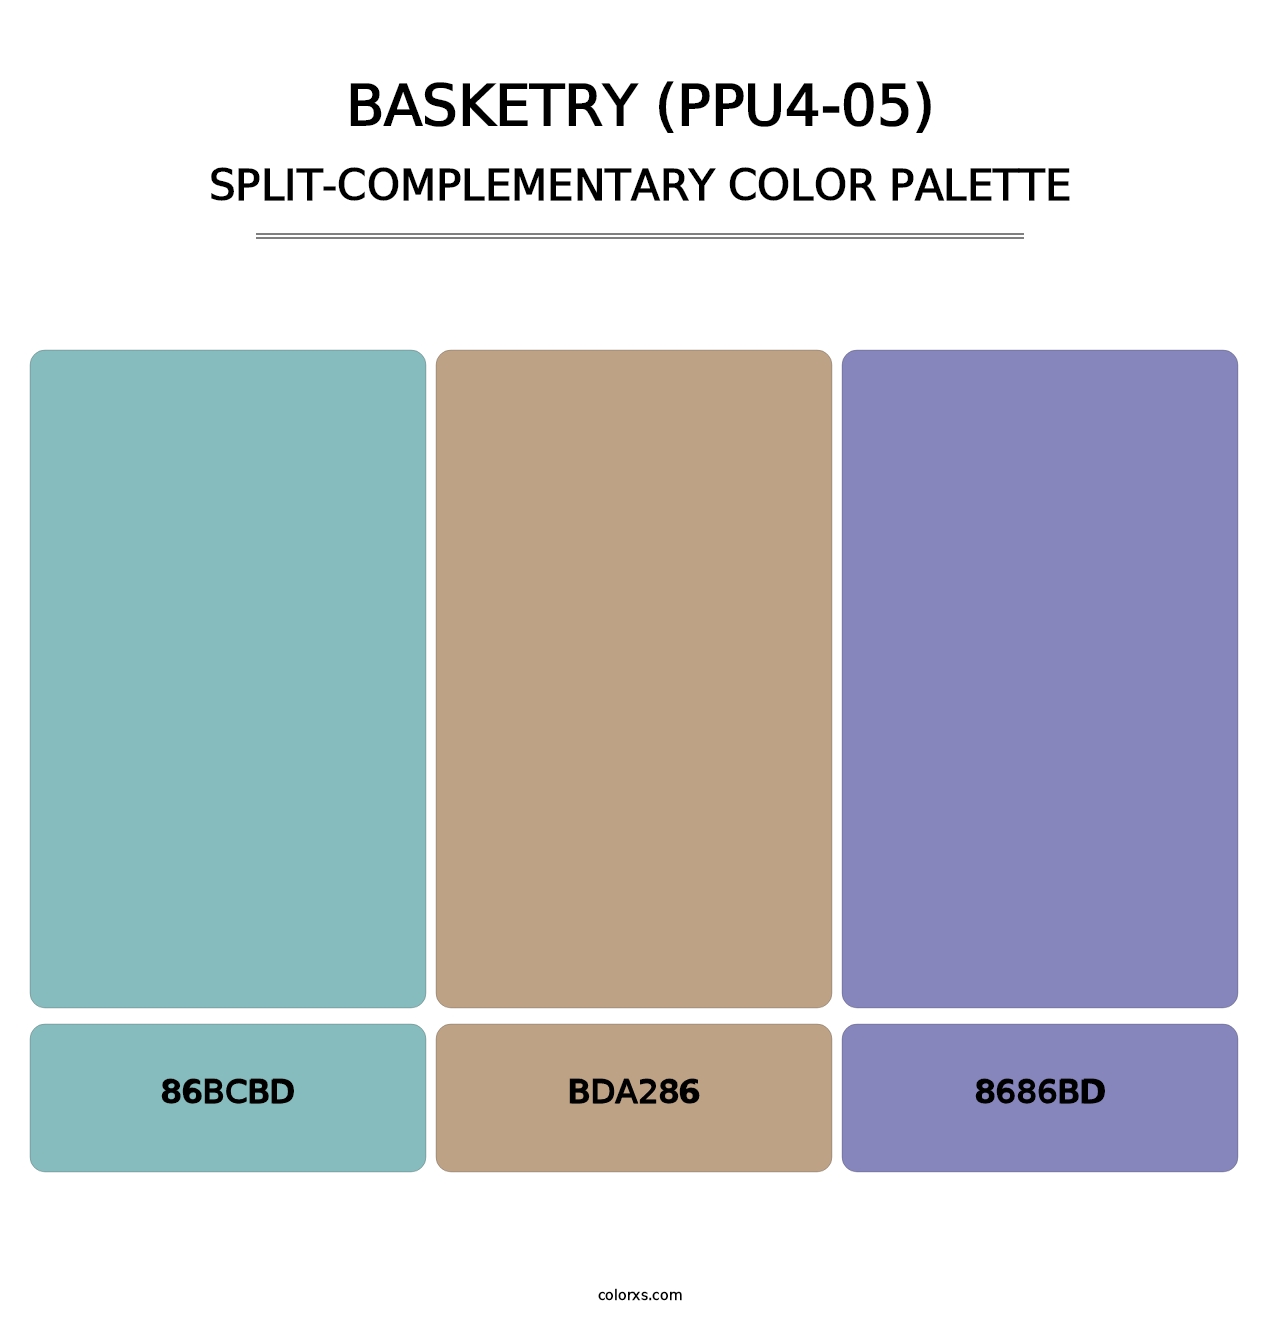 Basketry (PPU4-05) - Split-Complementary Color Palette